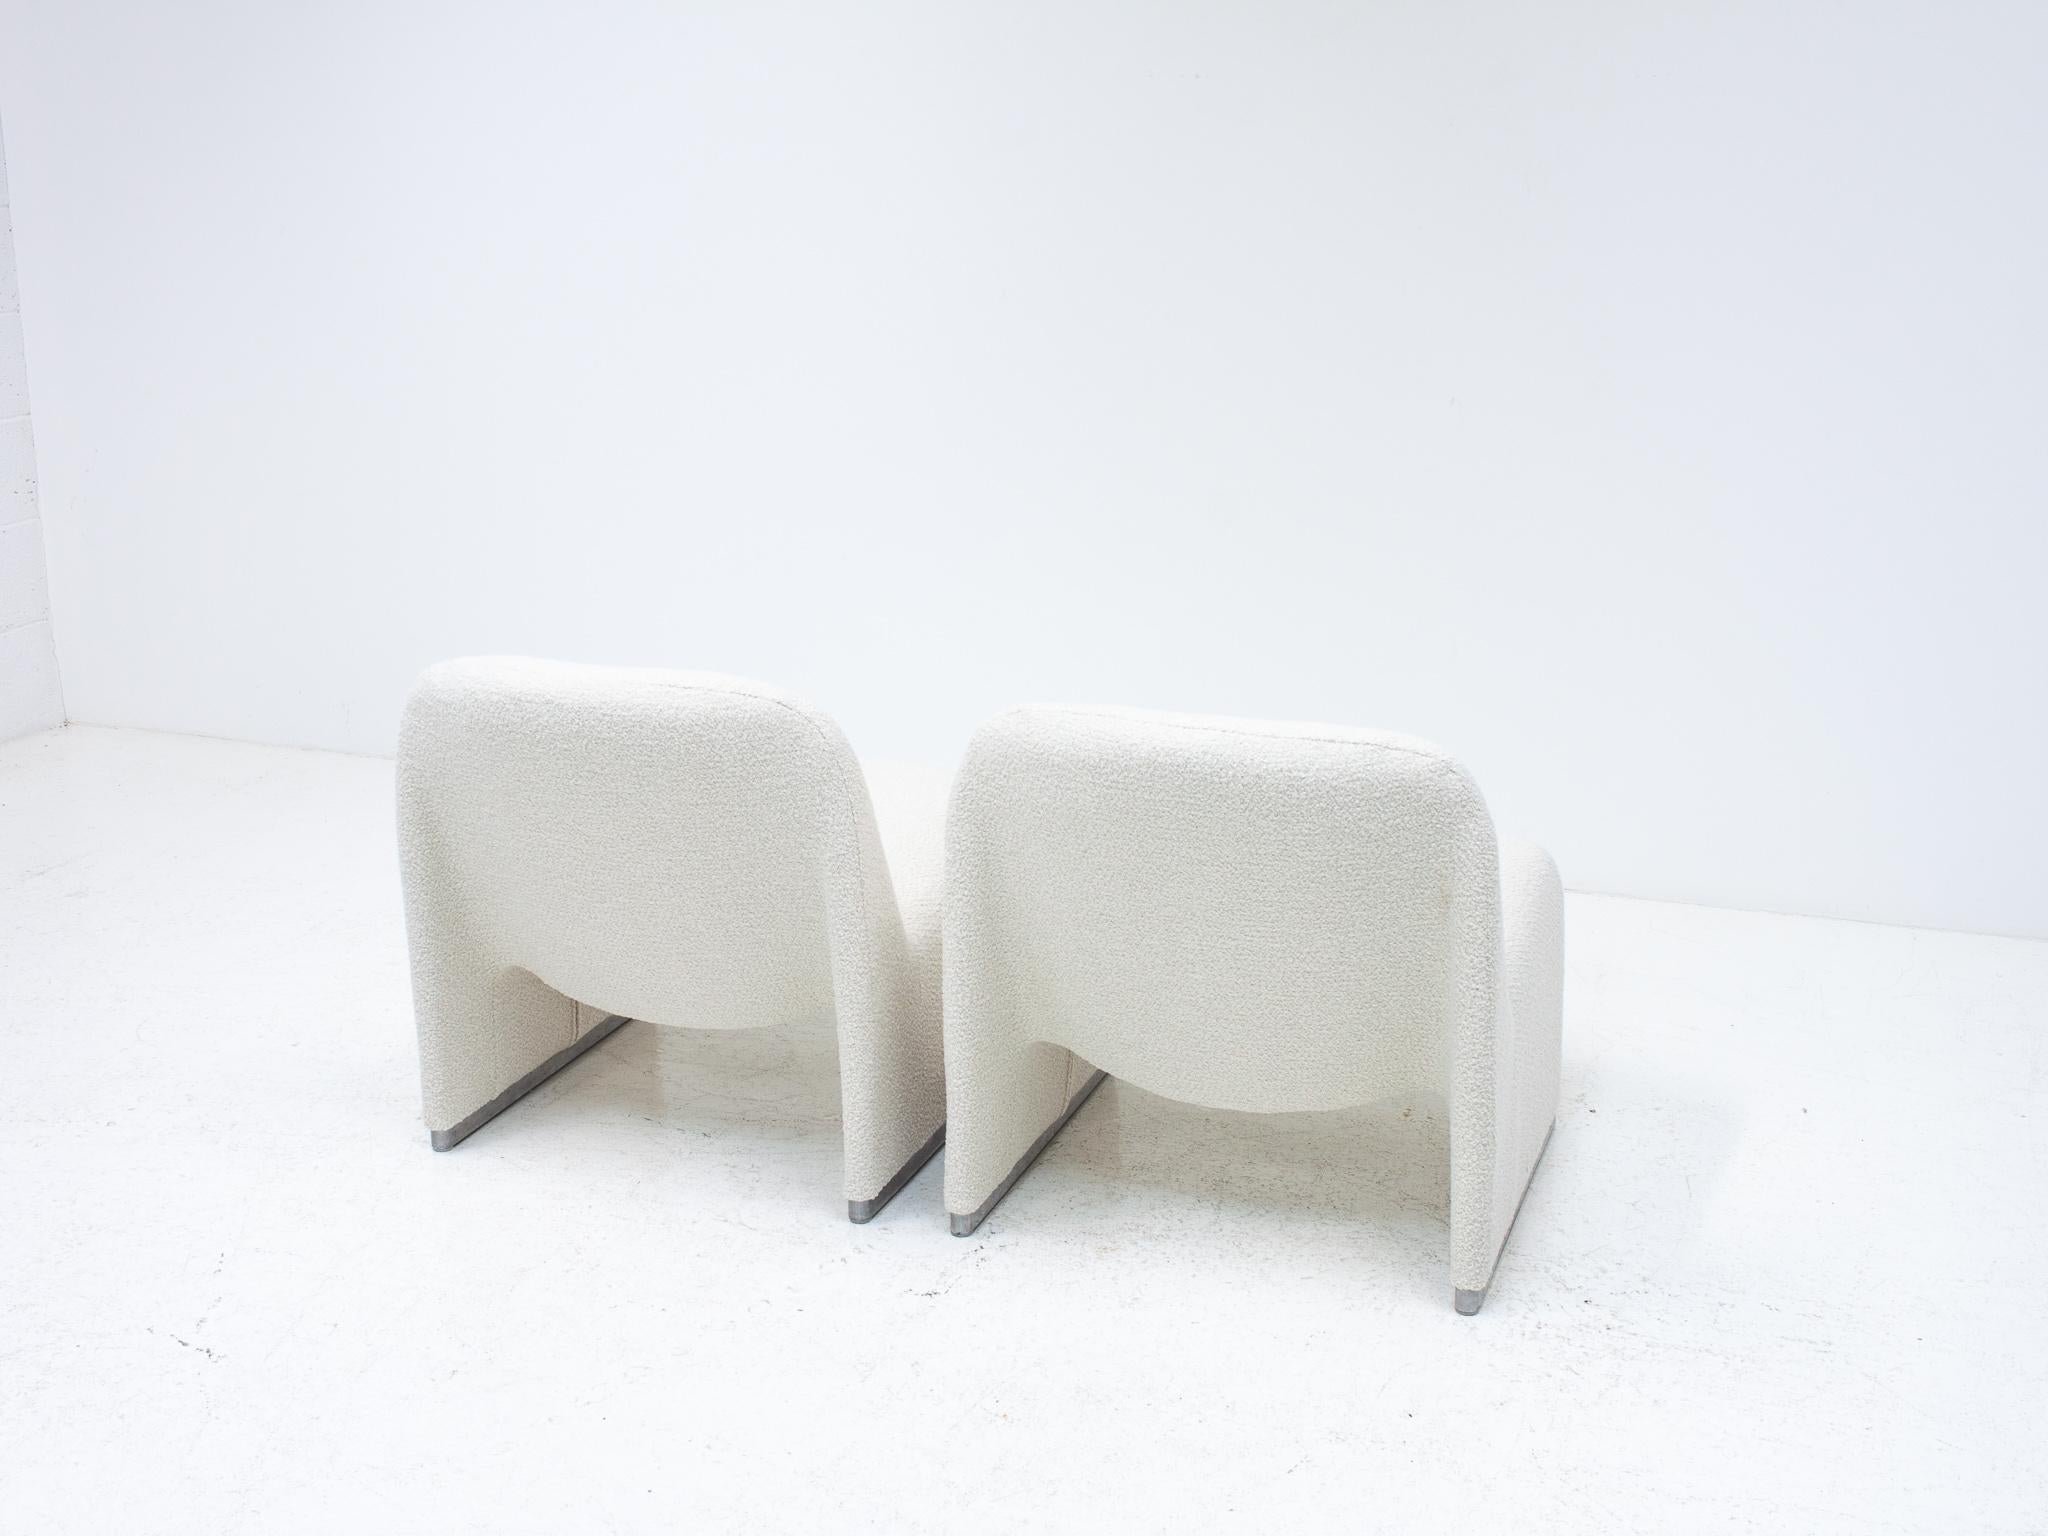 Giancarlo Piretti “Alky” Chairs In Yarn Collective bouclé *Customizable* For Sale 8